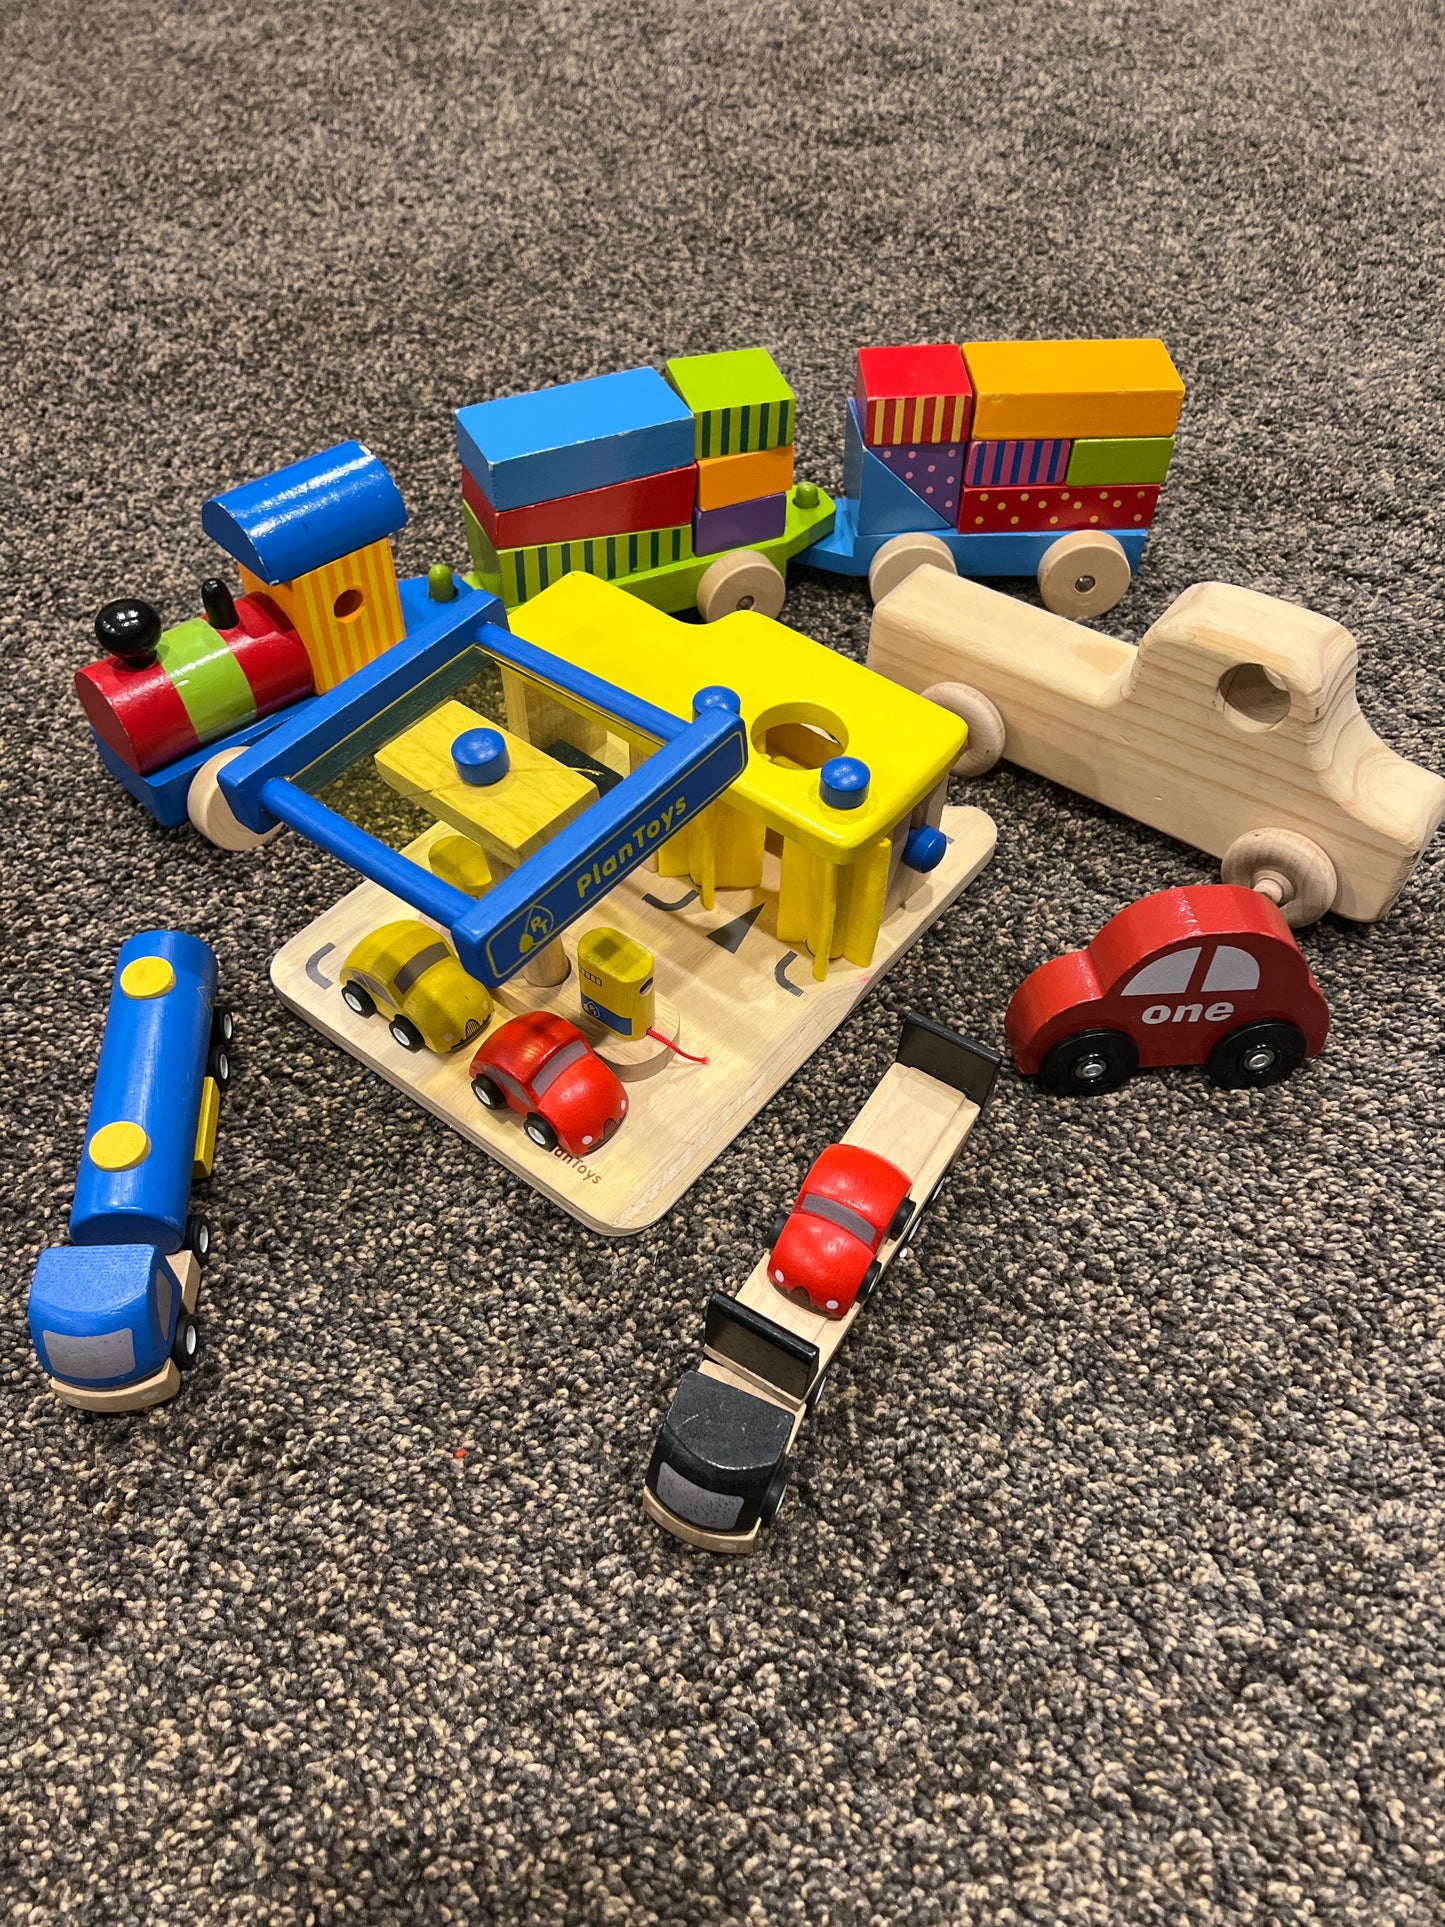 Plantoys wooden playset + wooden train and cars